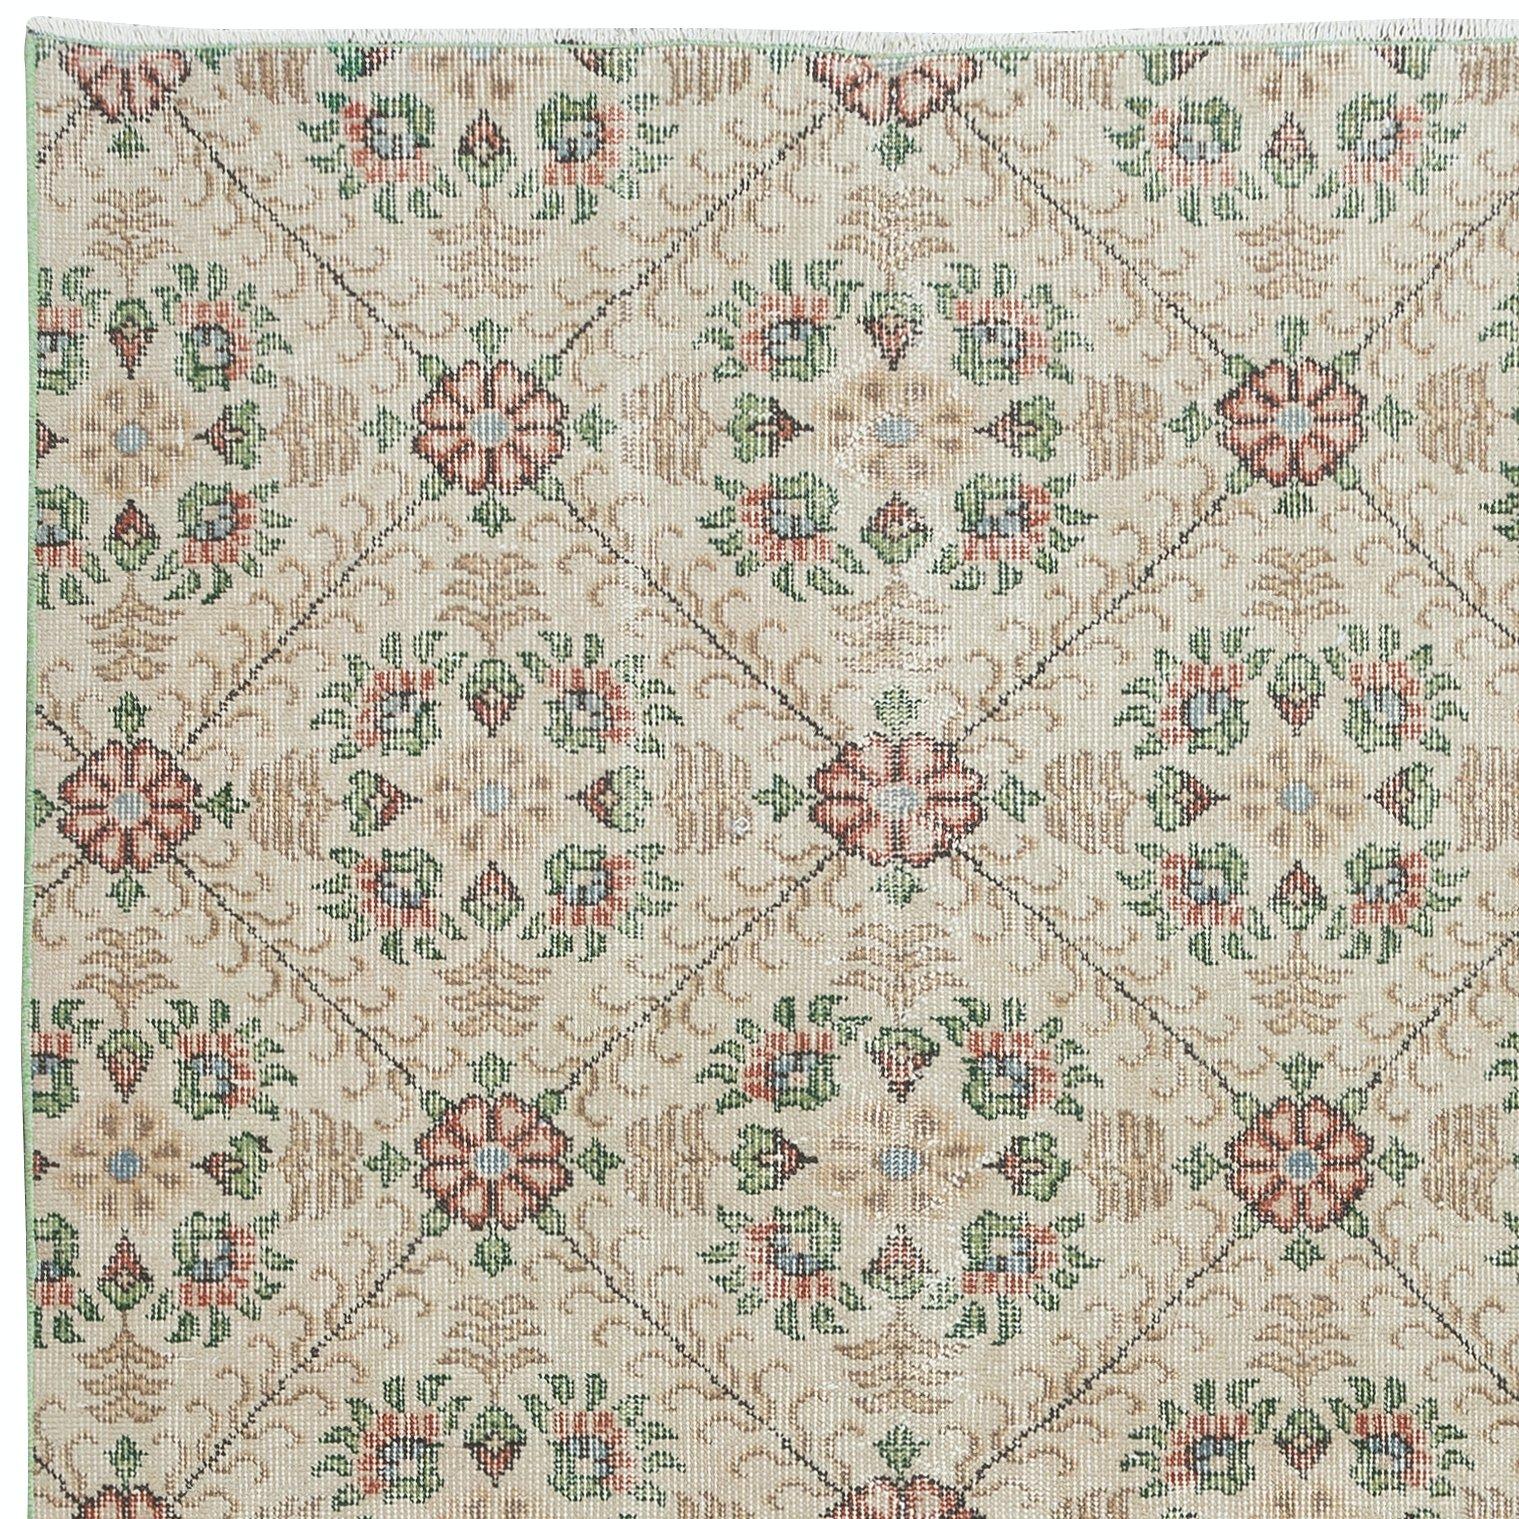 Turkish 4x6.8 Ft Handknotted Vintage Rug with Beige Background and Green Floral Pattern For Sale